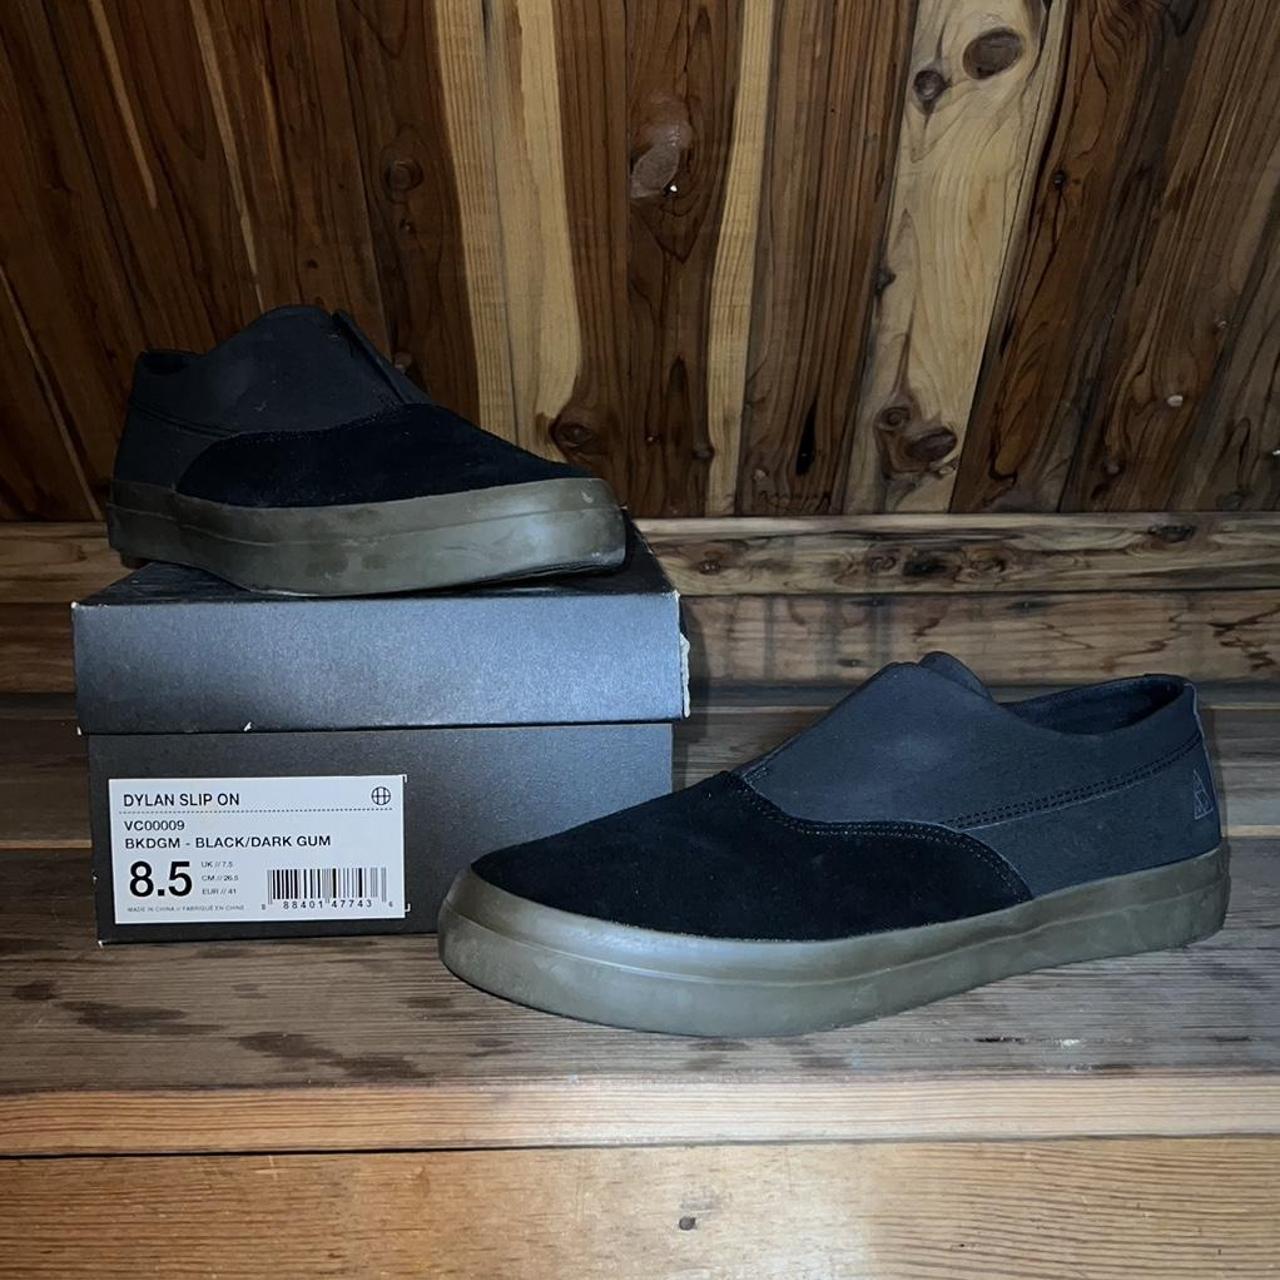 Huf Dylan Slip on 8.5 Mint condition with box #huf - Depop